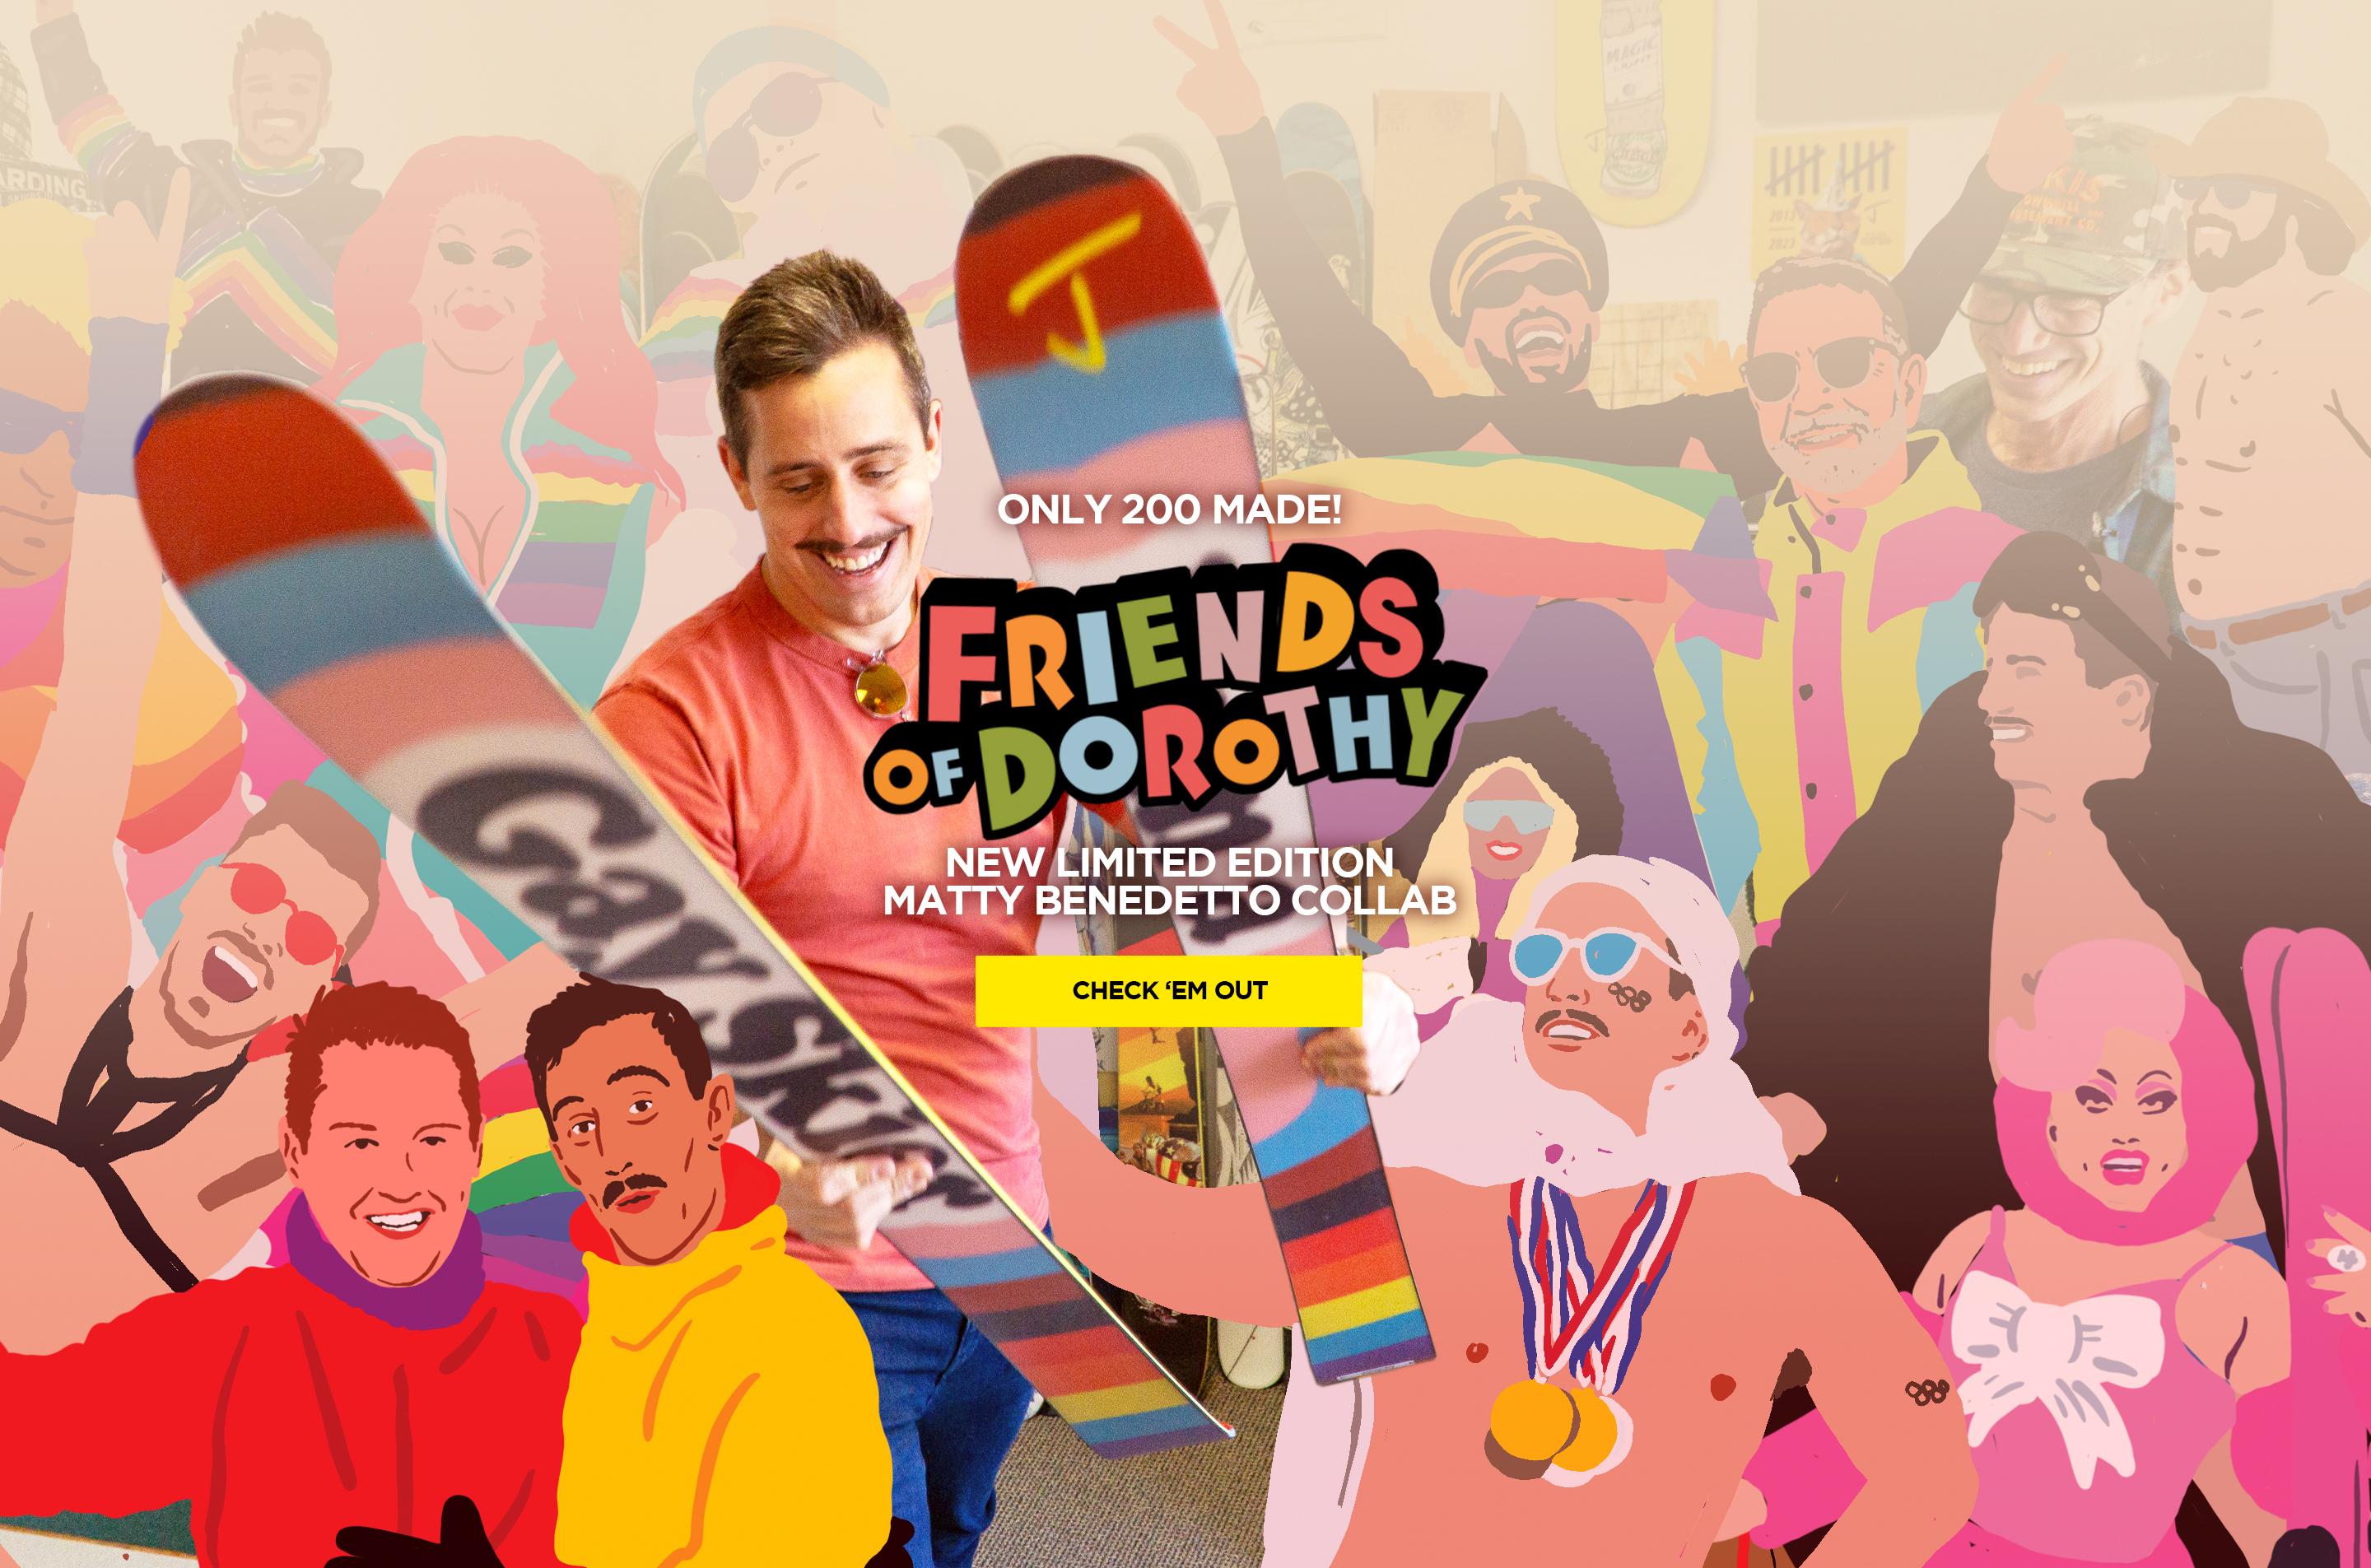 "Friends of Dorothy" collaboration with Matty Benedetto comes out June 6th